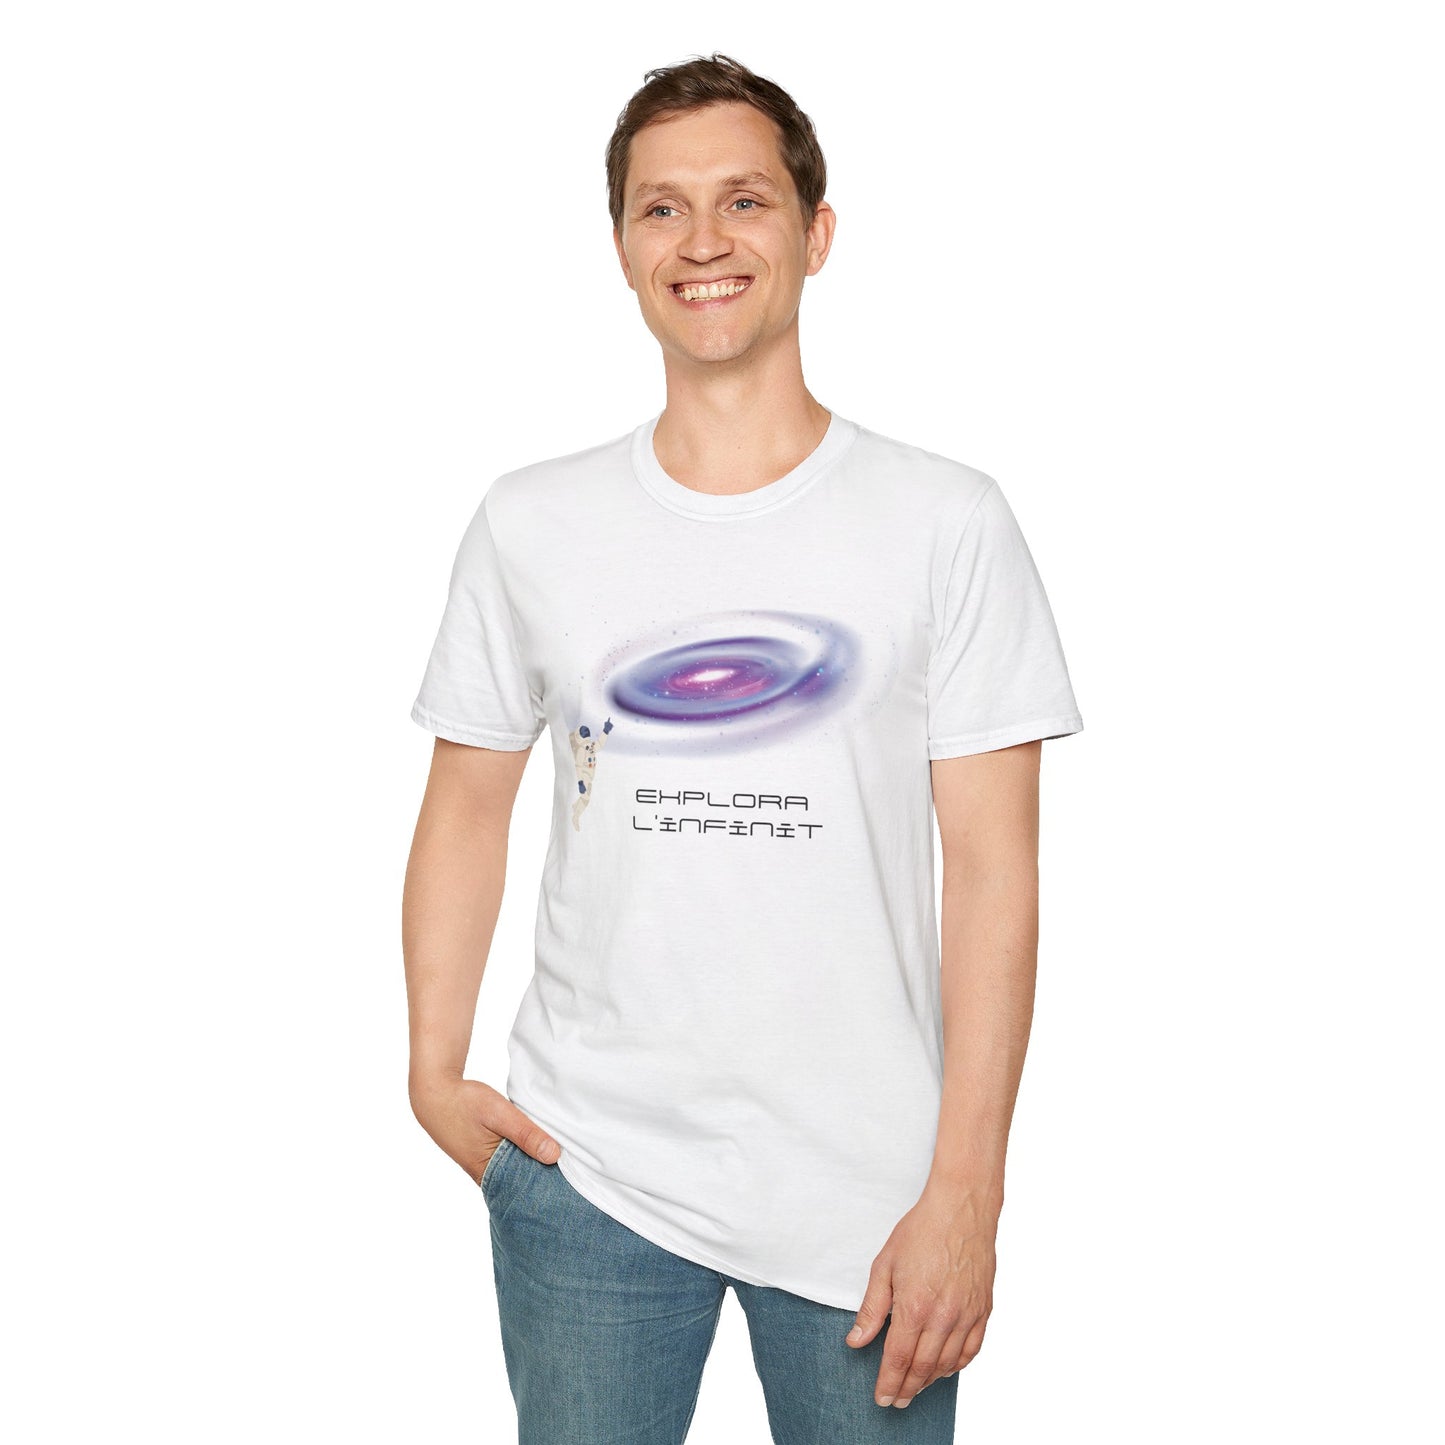 Unisex short-sleeved t-shirt, with a phrase in Catalan about the solar system.